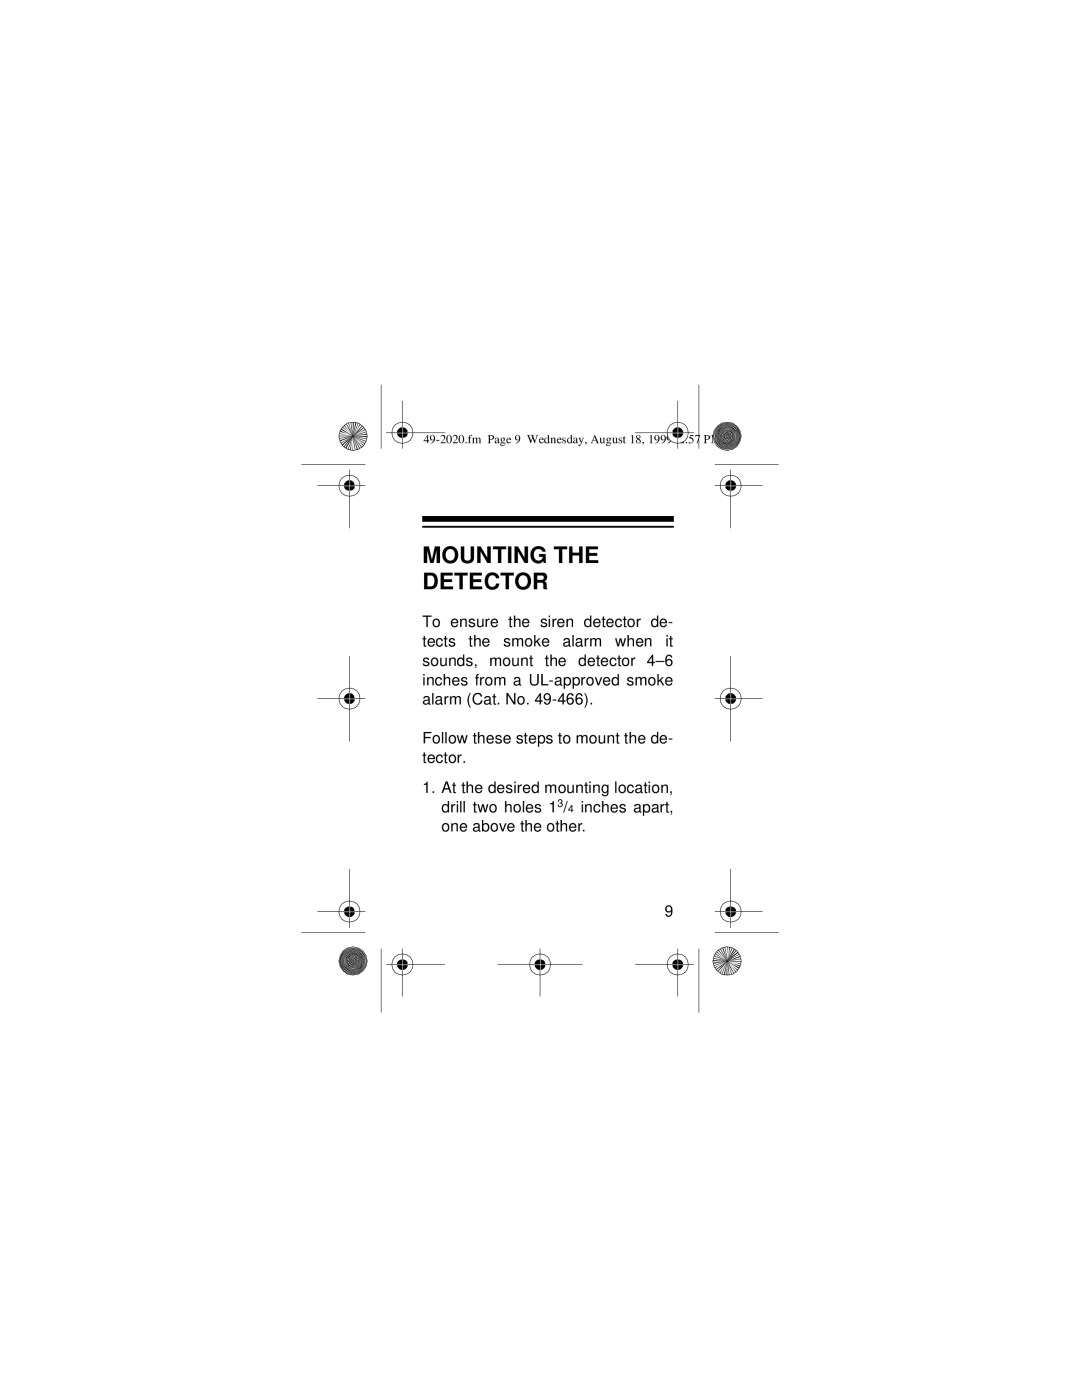 Radio Shack 49-2011, 49-2010, 49-2020 owner manual Mounting The Detector, Follow these steps to mount the de- tector 